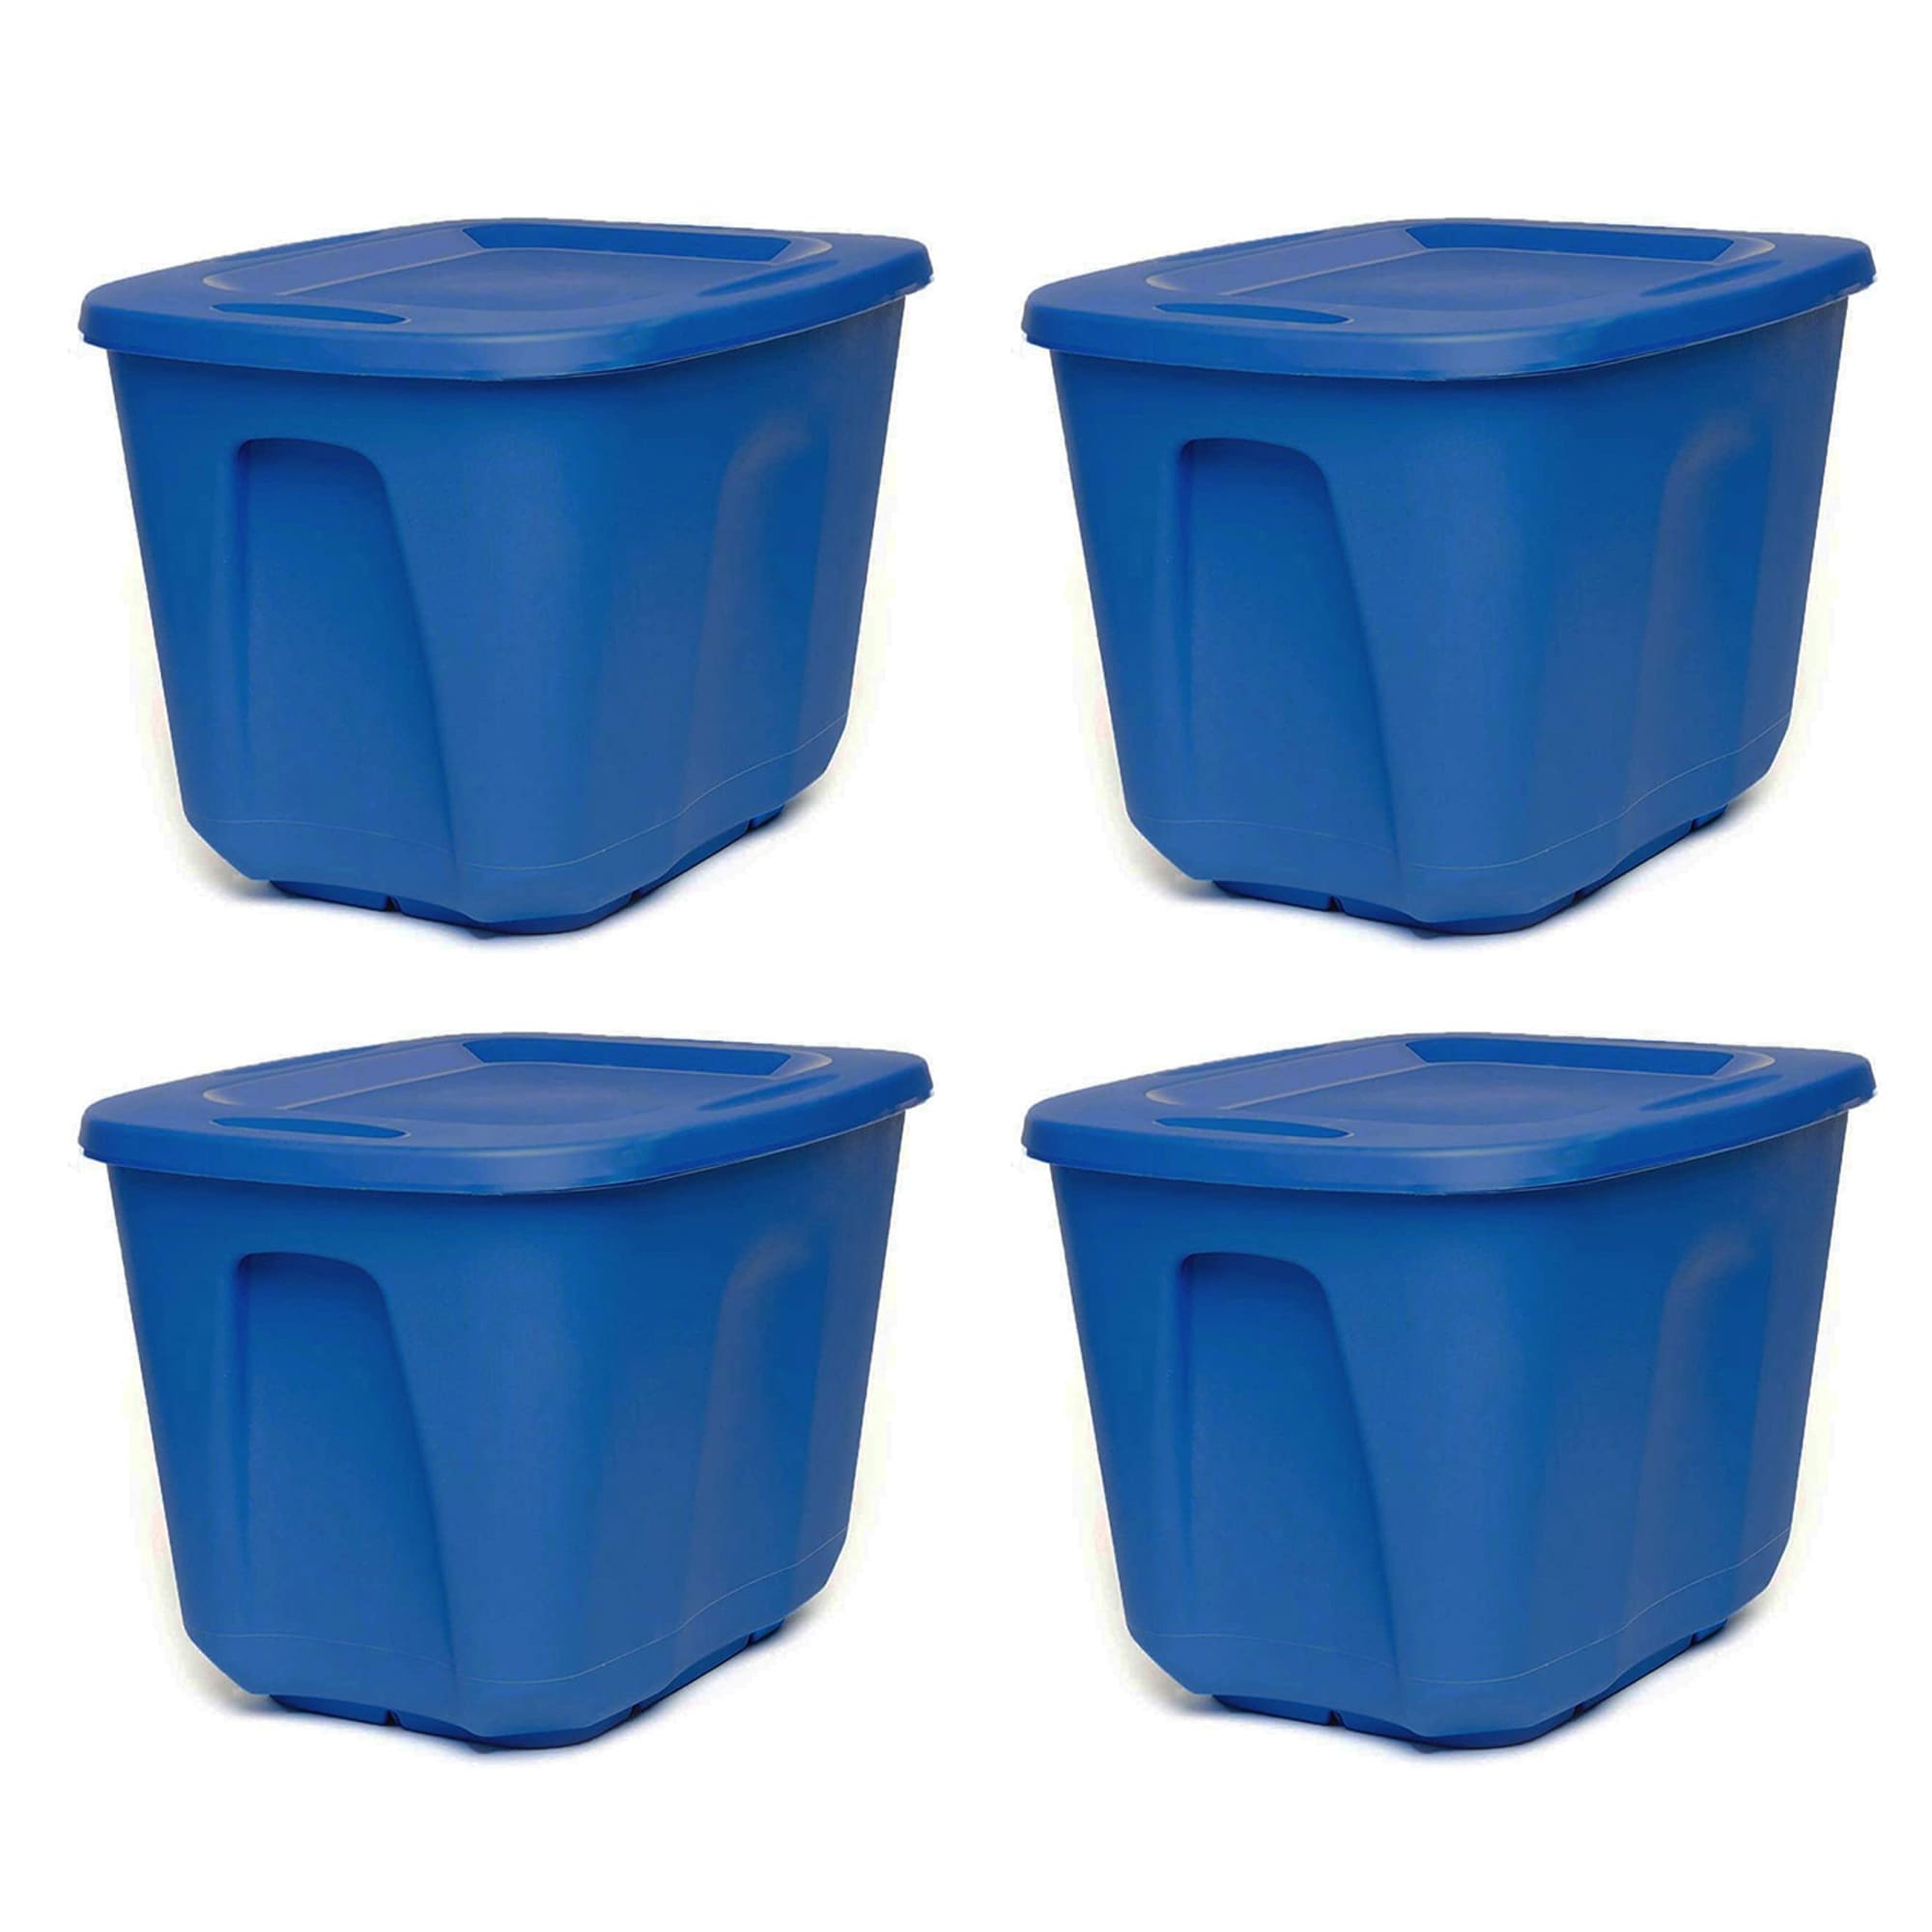 https://ak1.ostkcdn.com/images/products/is/images/direct/6f60fce7a9c390fd03851c8b5aa7bc35ca99b6f6/HOMZ-10-Gallon-Heavy-Duty-Plastic-Storage-Container-Bin%2C-Capri-Blue-%288-Pack%29.jpg